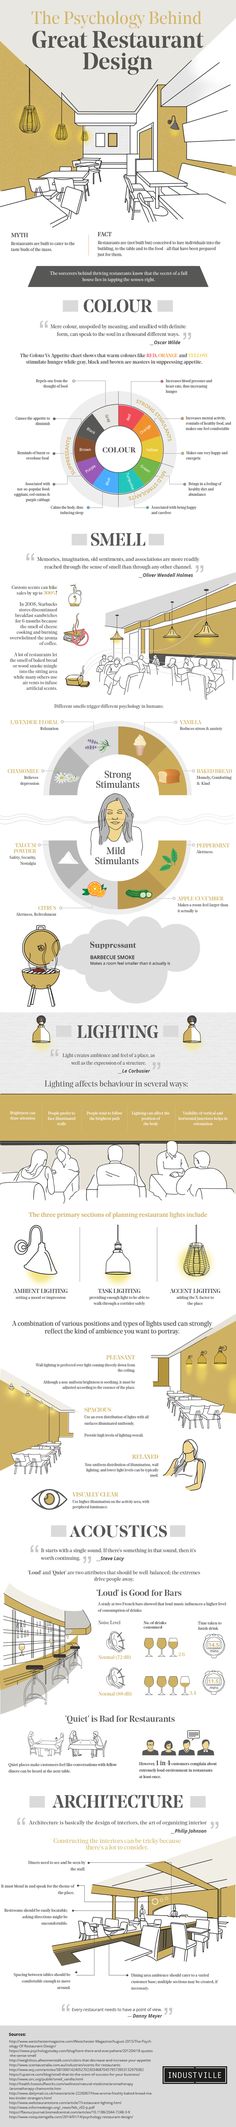 How To Make Your Restaurant Influencing And Attractive — Renzell Design, Beautiful, Tips, Dekorasyon, Kopi, Bar, Infographic, Cafe